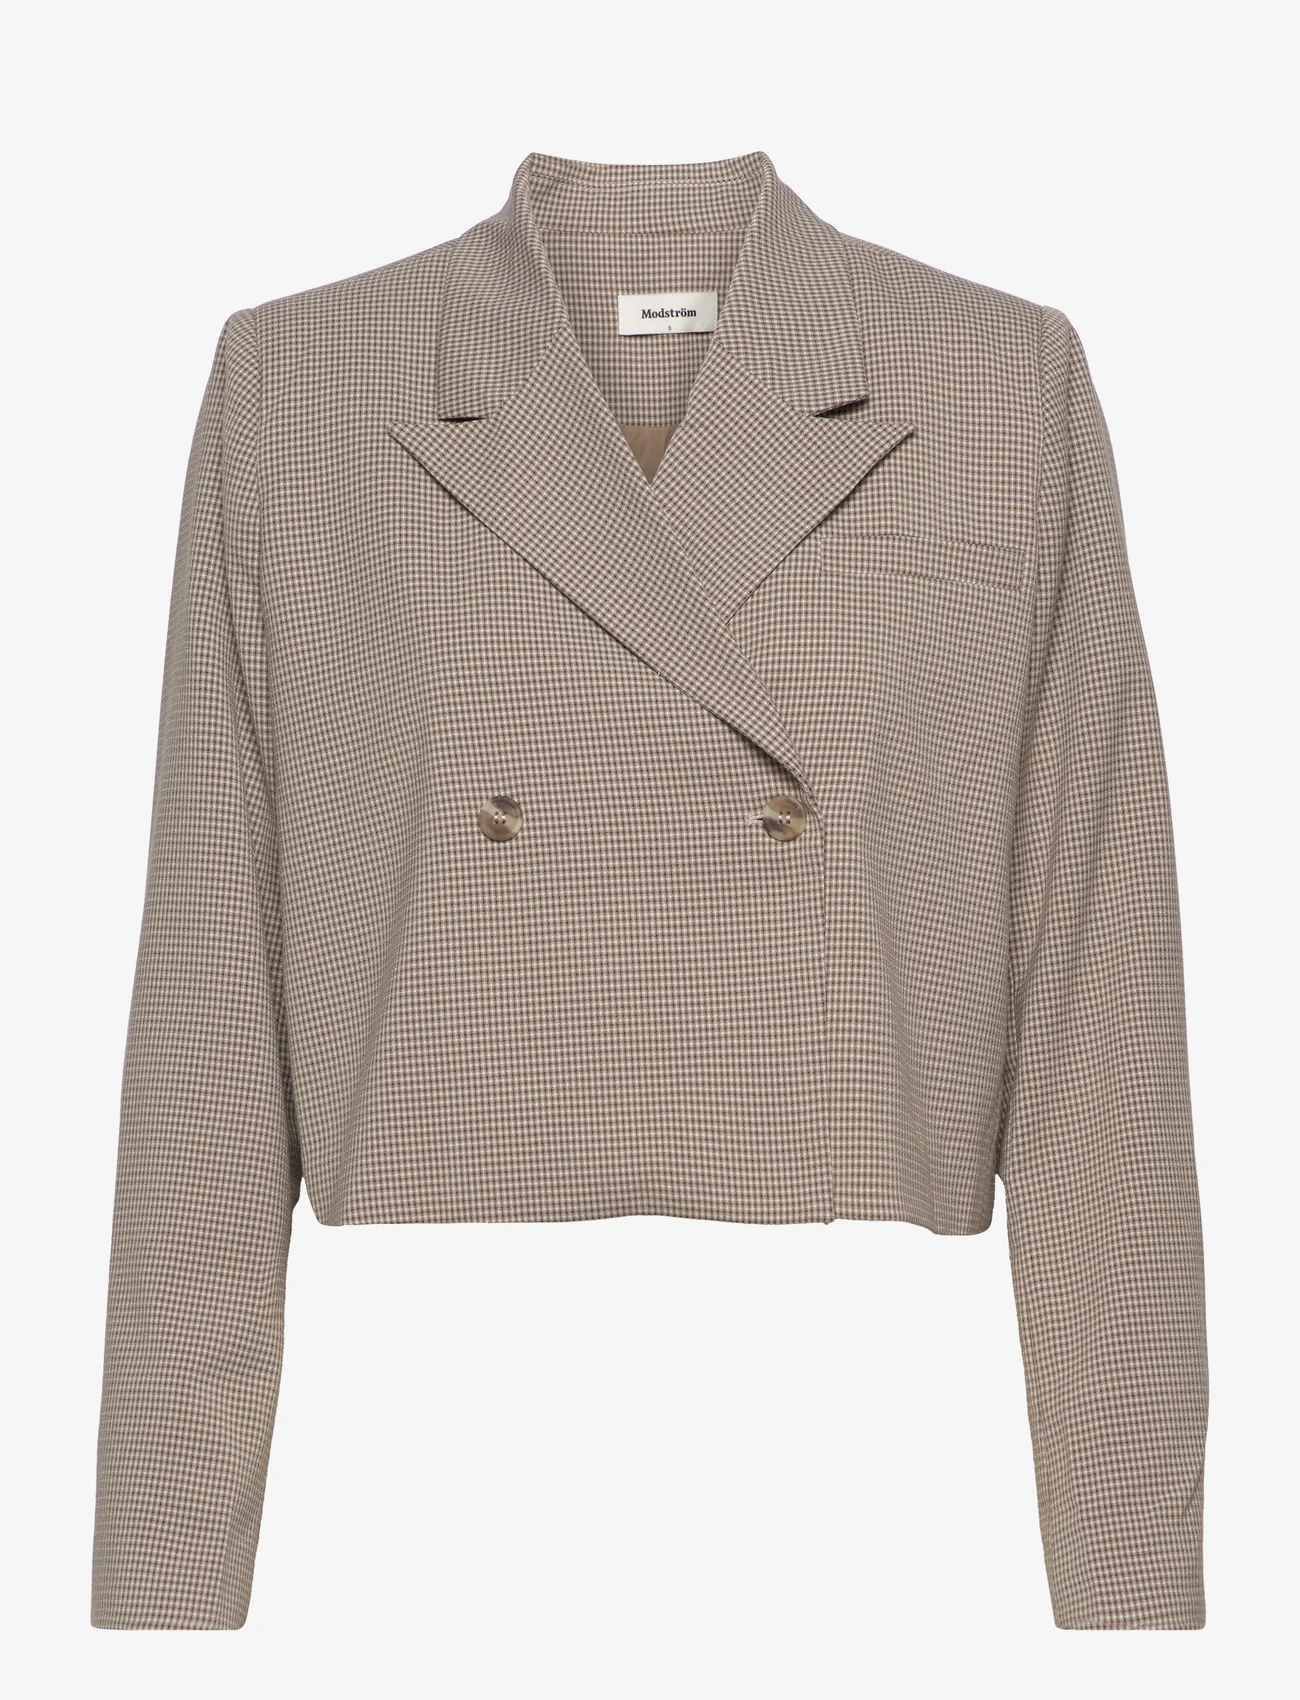 Modström - AtticusMD check Blazer - party wear at outlet prices - incense check - 0